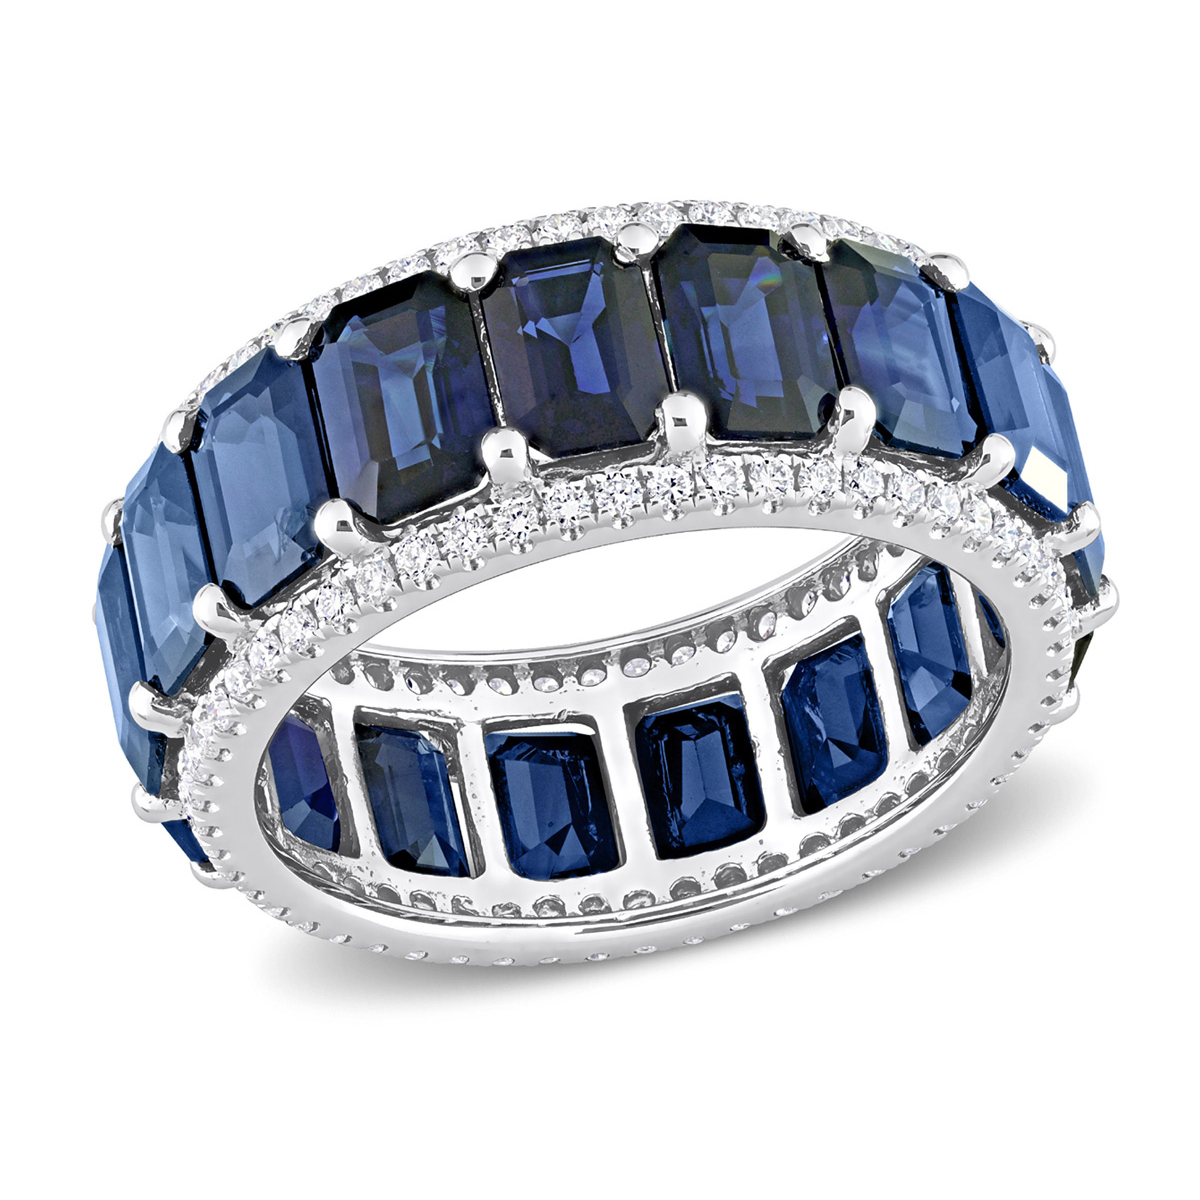 Gem And Harmony 11.90 Carat (ctw) Dark Blue Sapphire Ring Band with Diamonds in 14K White Gold